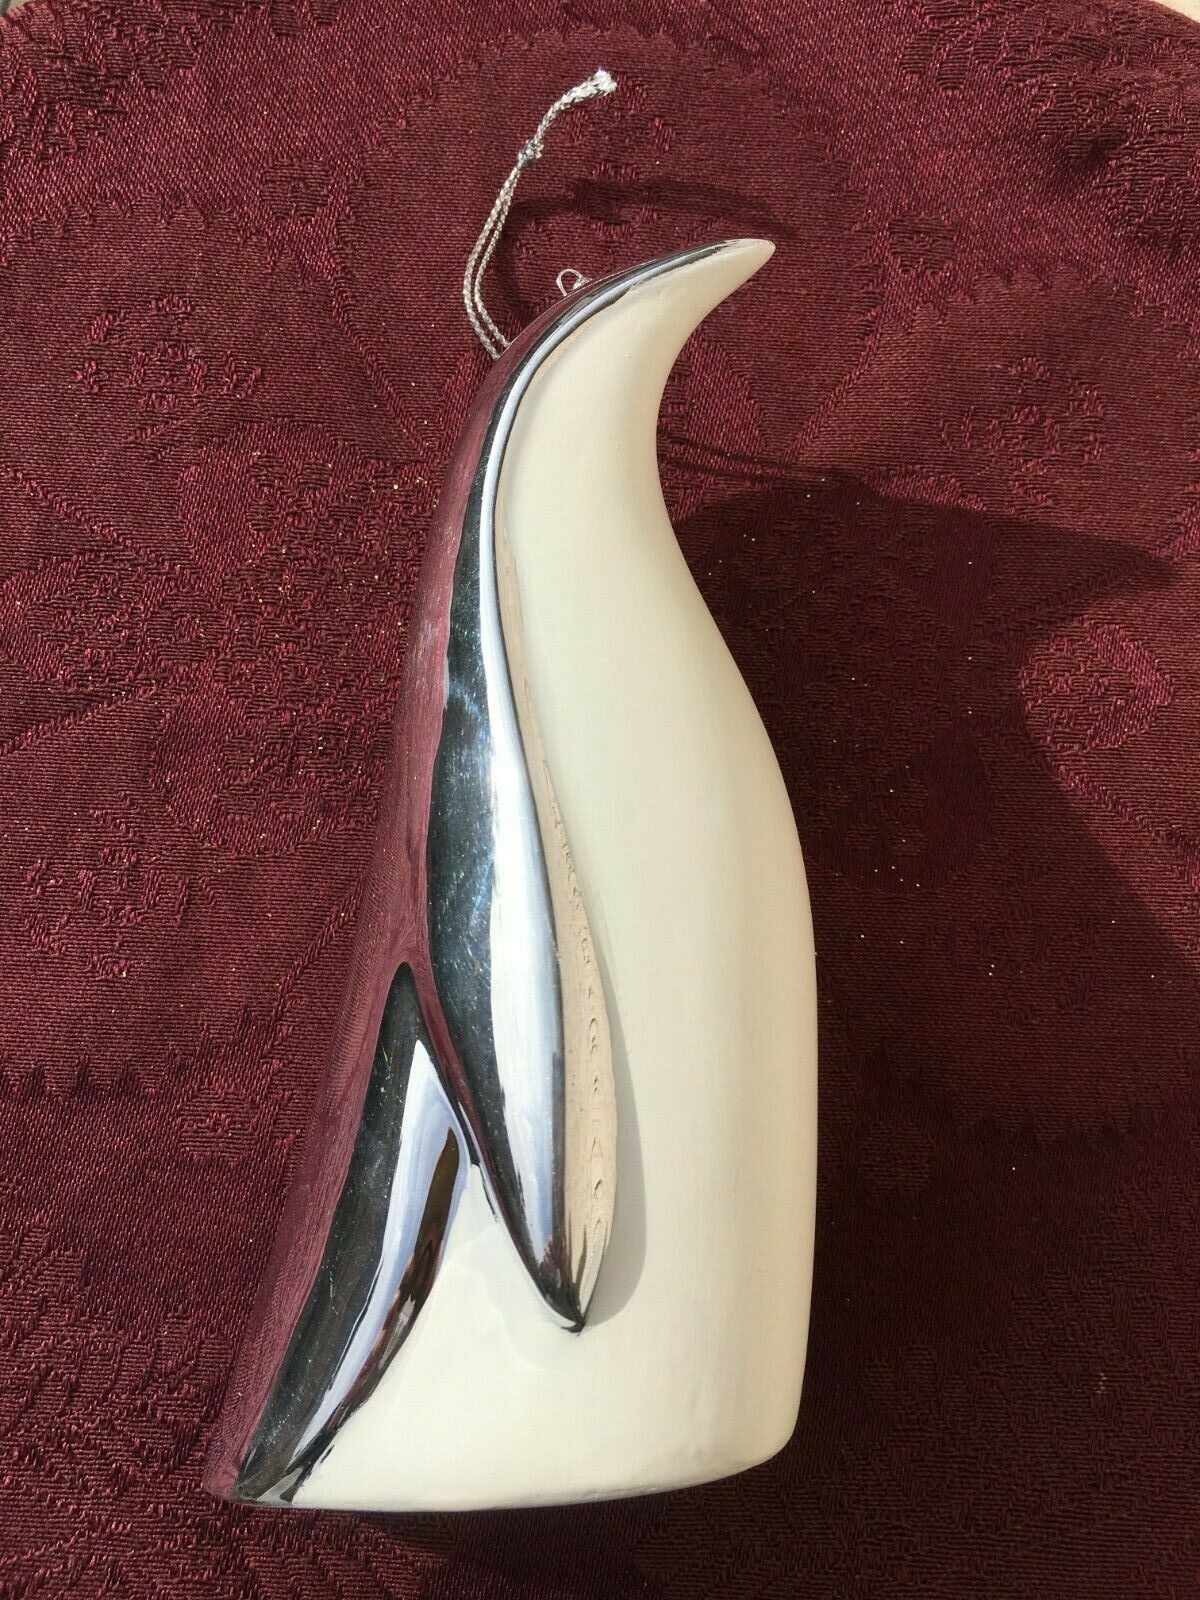 Penguin Figurine Silver And White Ceramic Sleek Christmas Ornament Large 5.5 In.